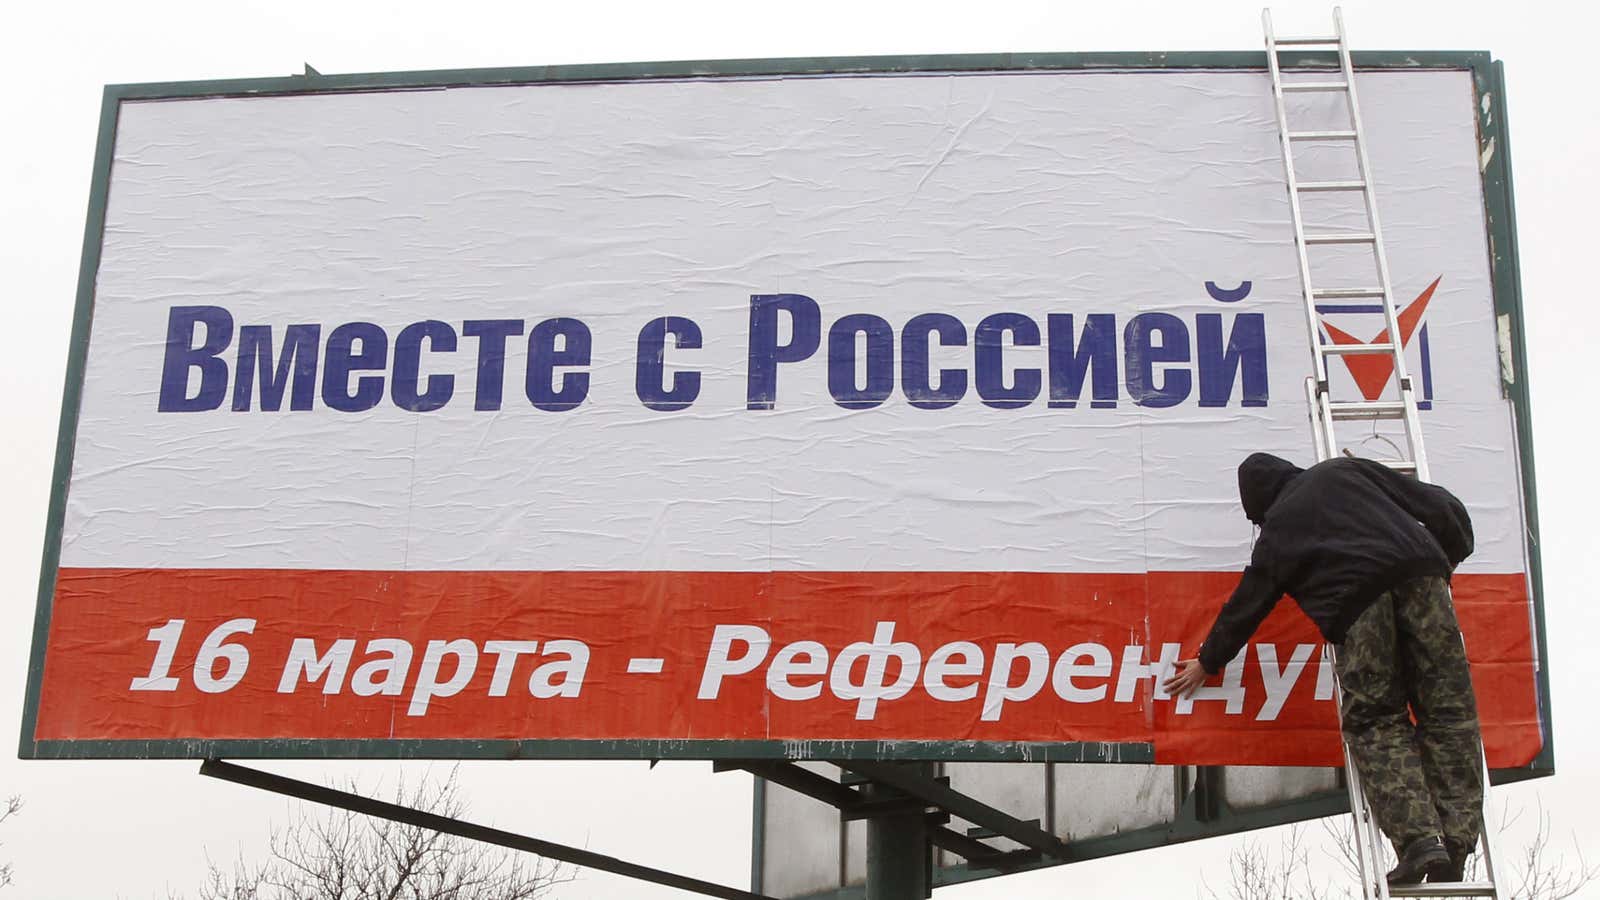 “Together with Russia. March 16 – referendum.” The impact will be felt far beyond Crimea.